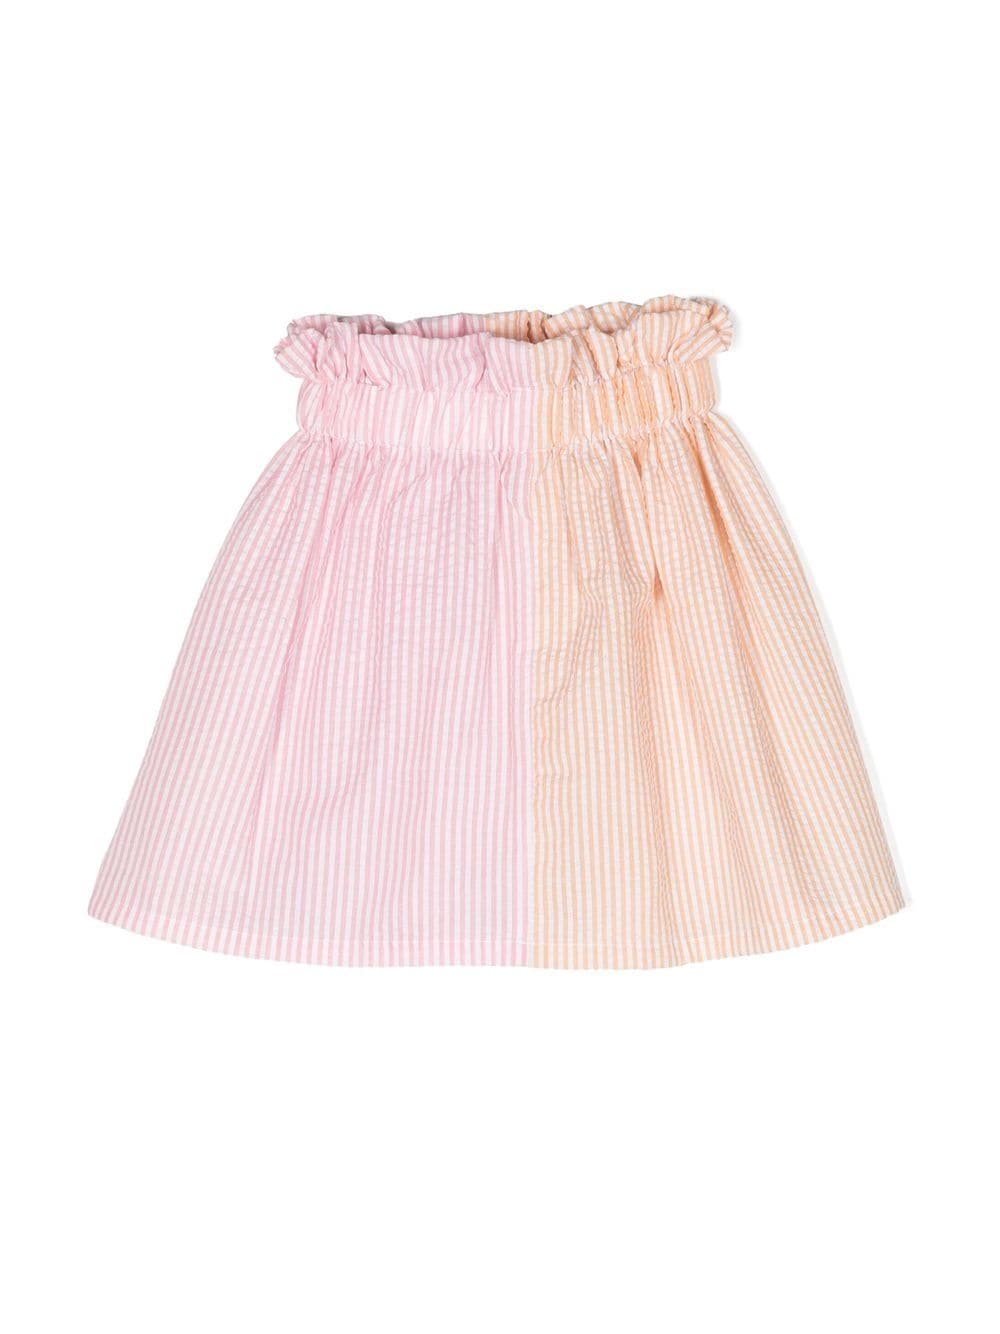 WAUW CAPOW by BANGBANG Rosemary ruffled-detail cotton skirt - Pink von WAUW CAPOW by BANGBANG